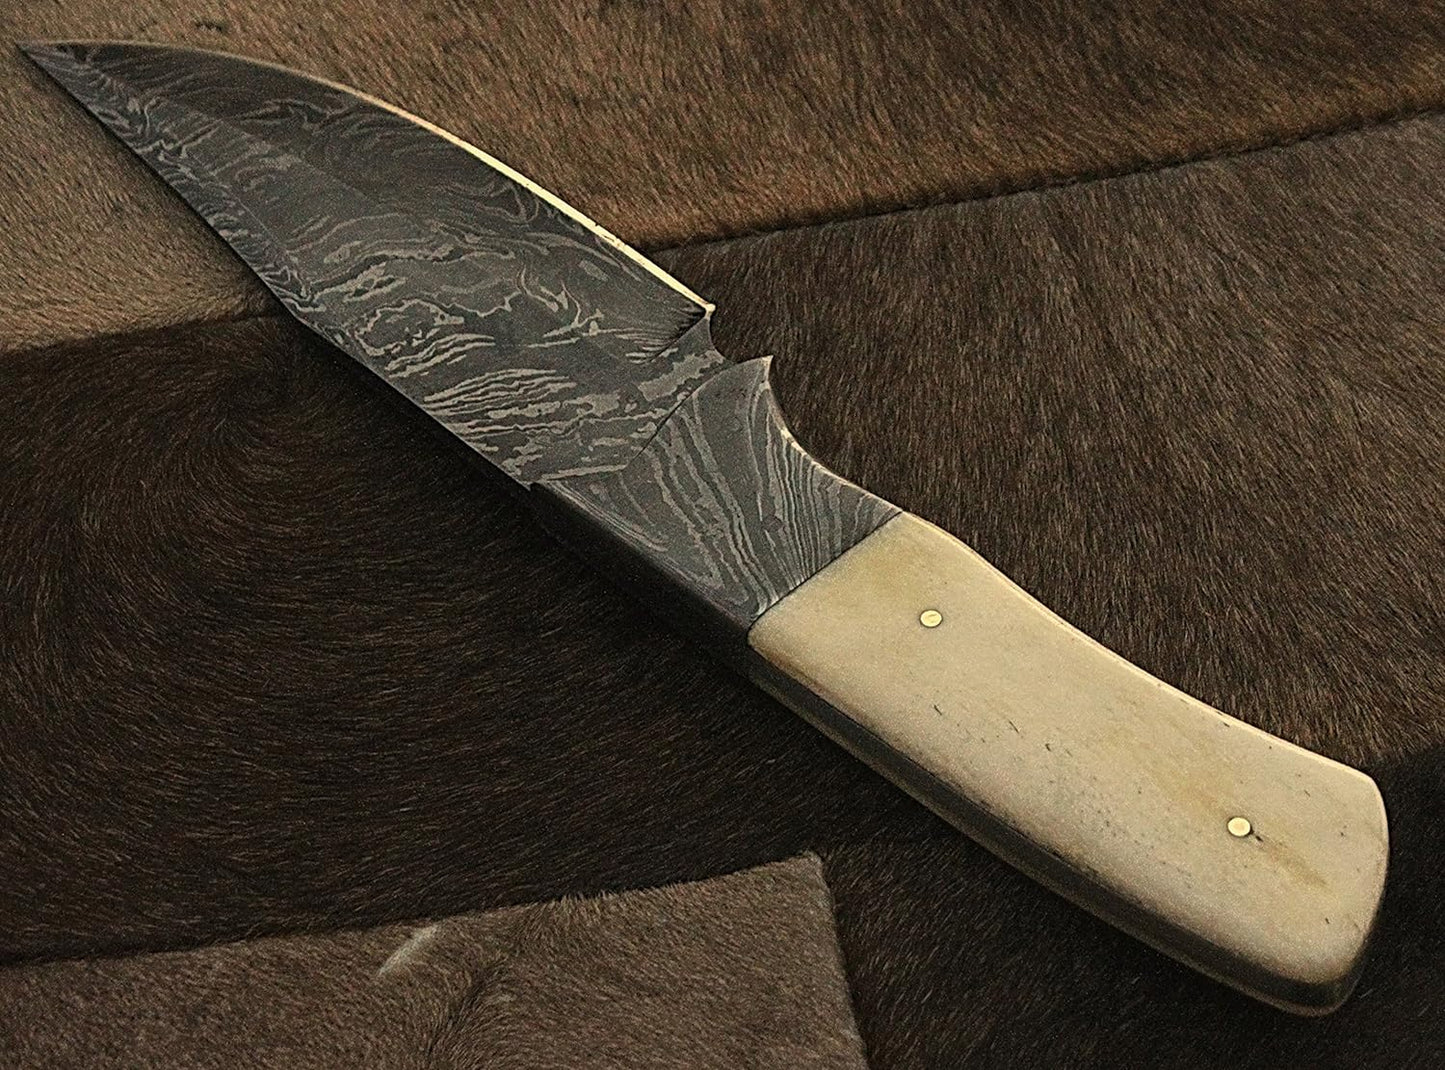 KD Hunting Knife Damascus Steel with Real Leather Sheath